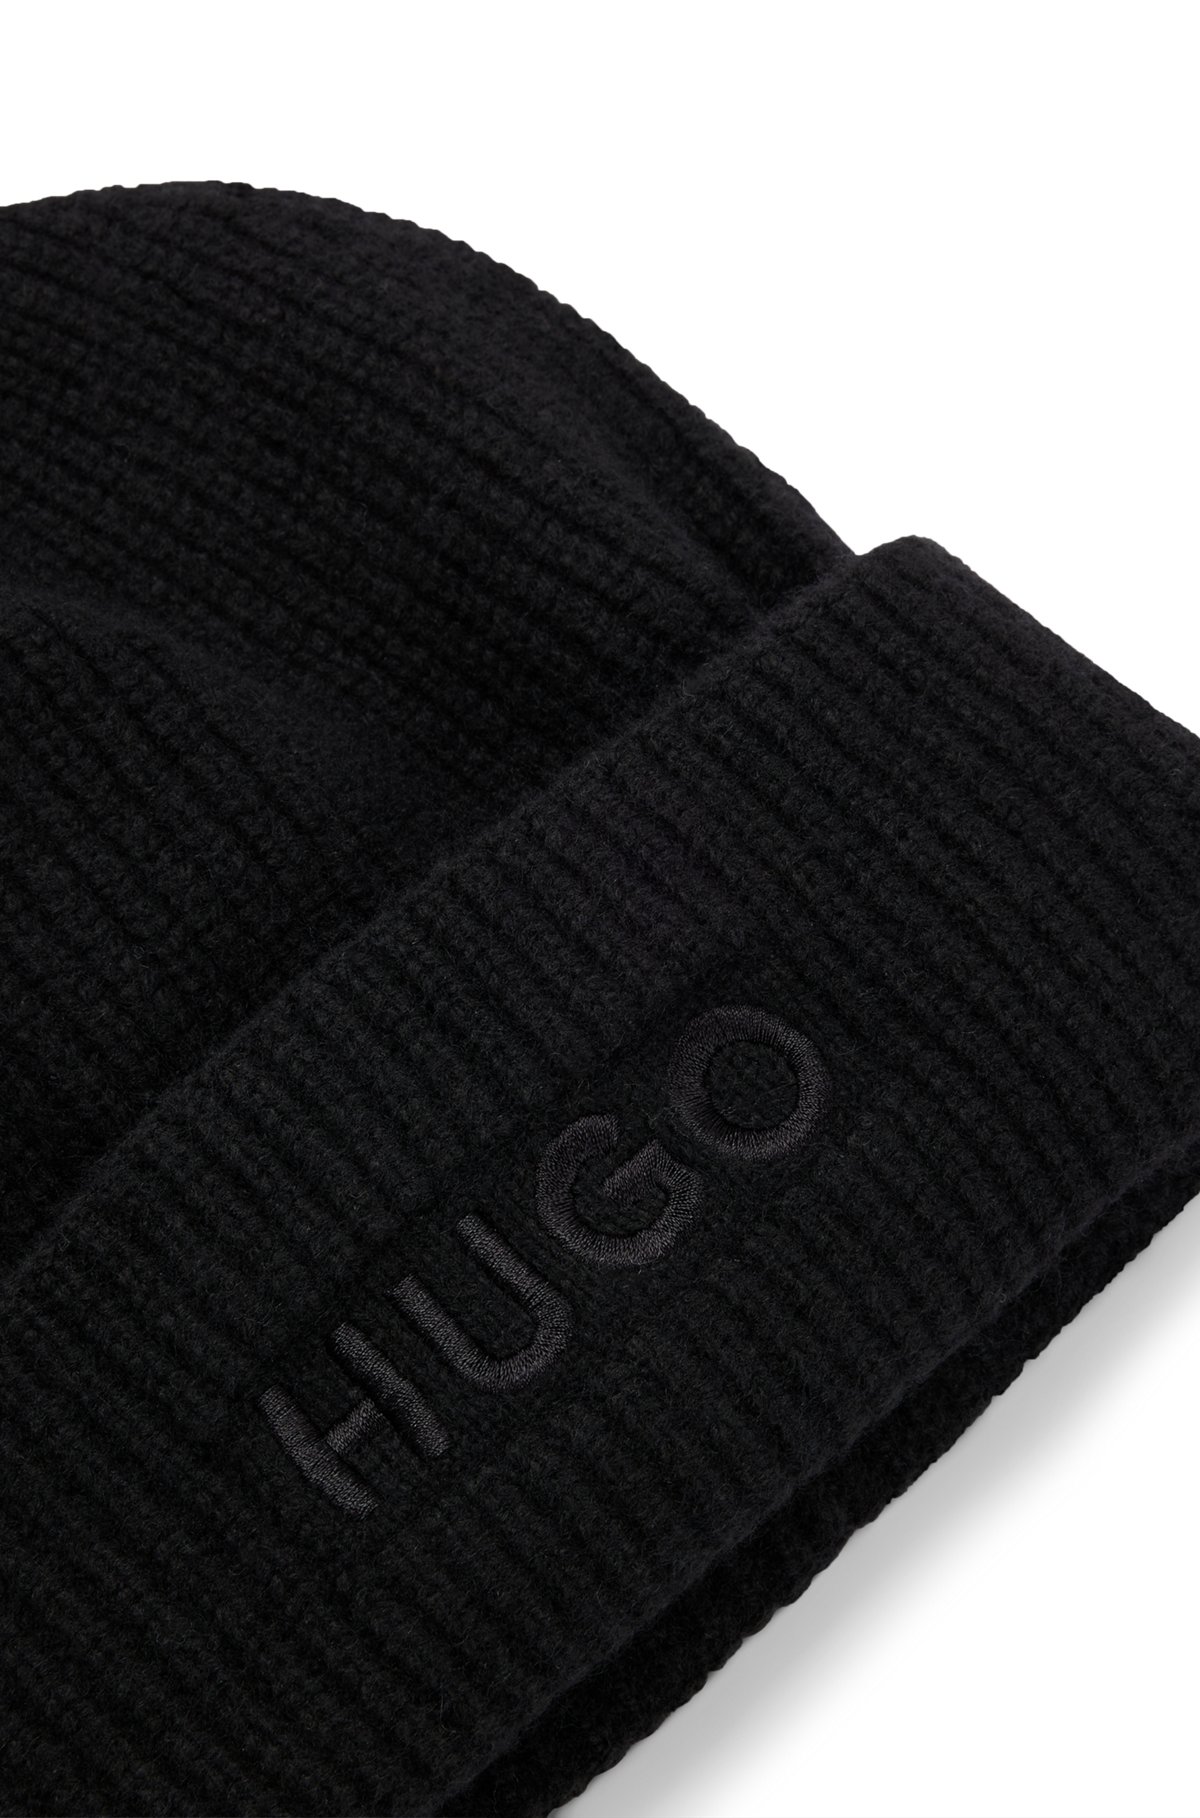 Ribbed beanie hat with embroidered logo, Black